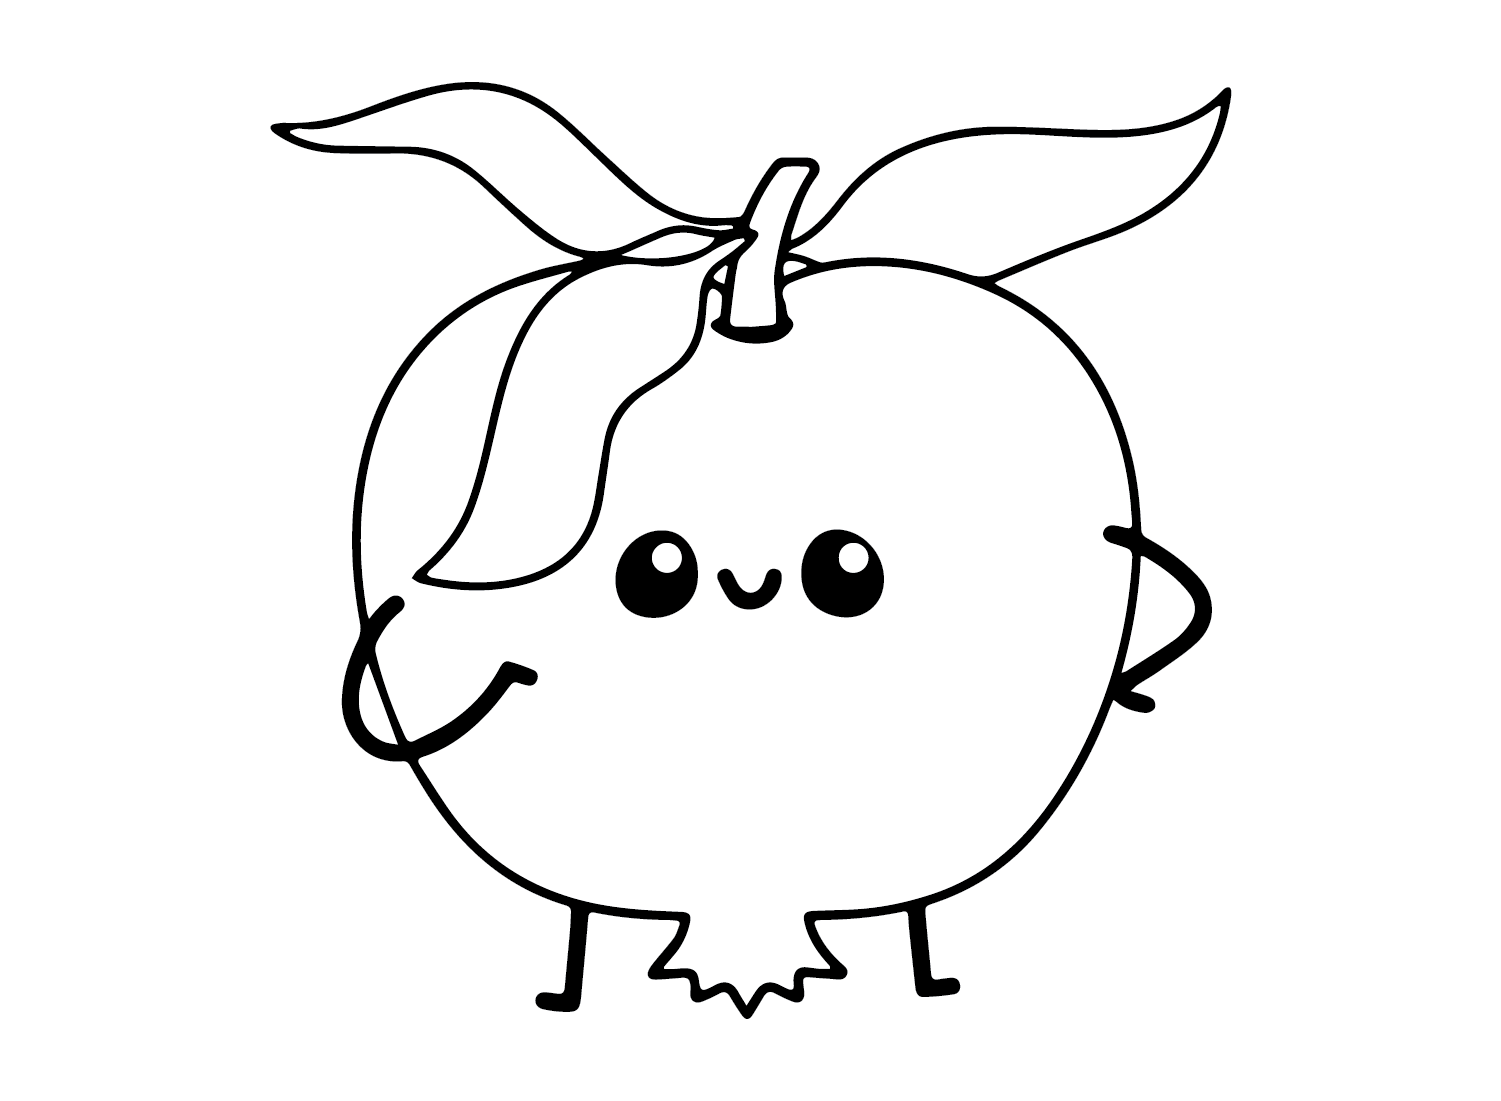 Adorable Pomegranate Coloring Page